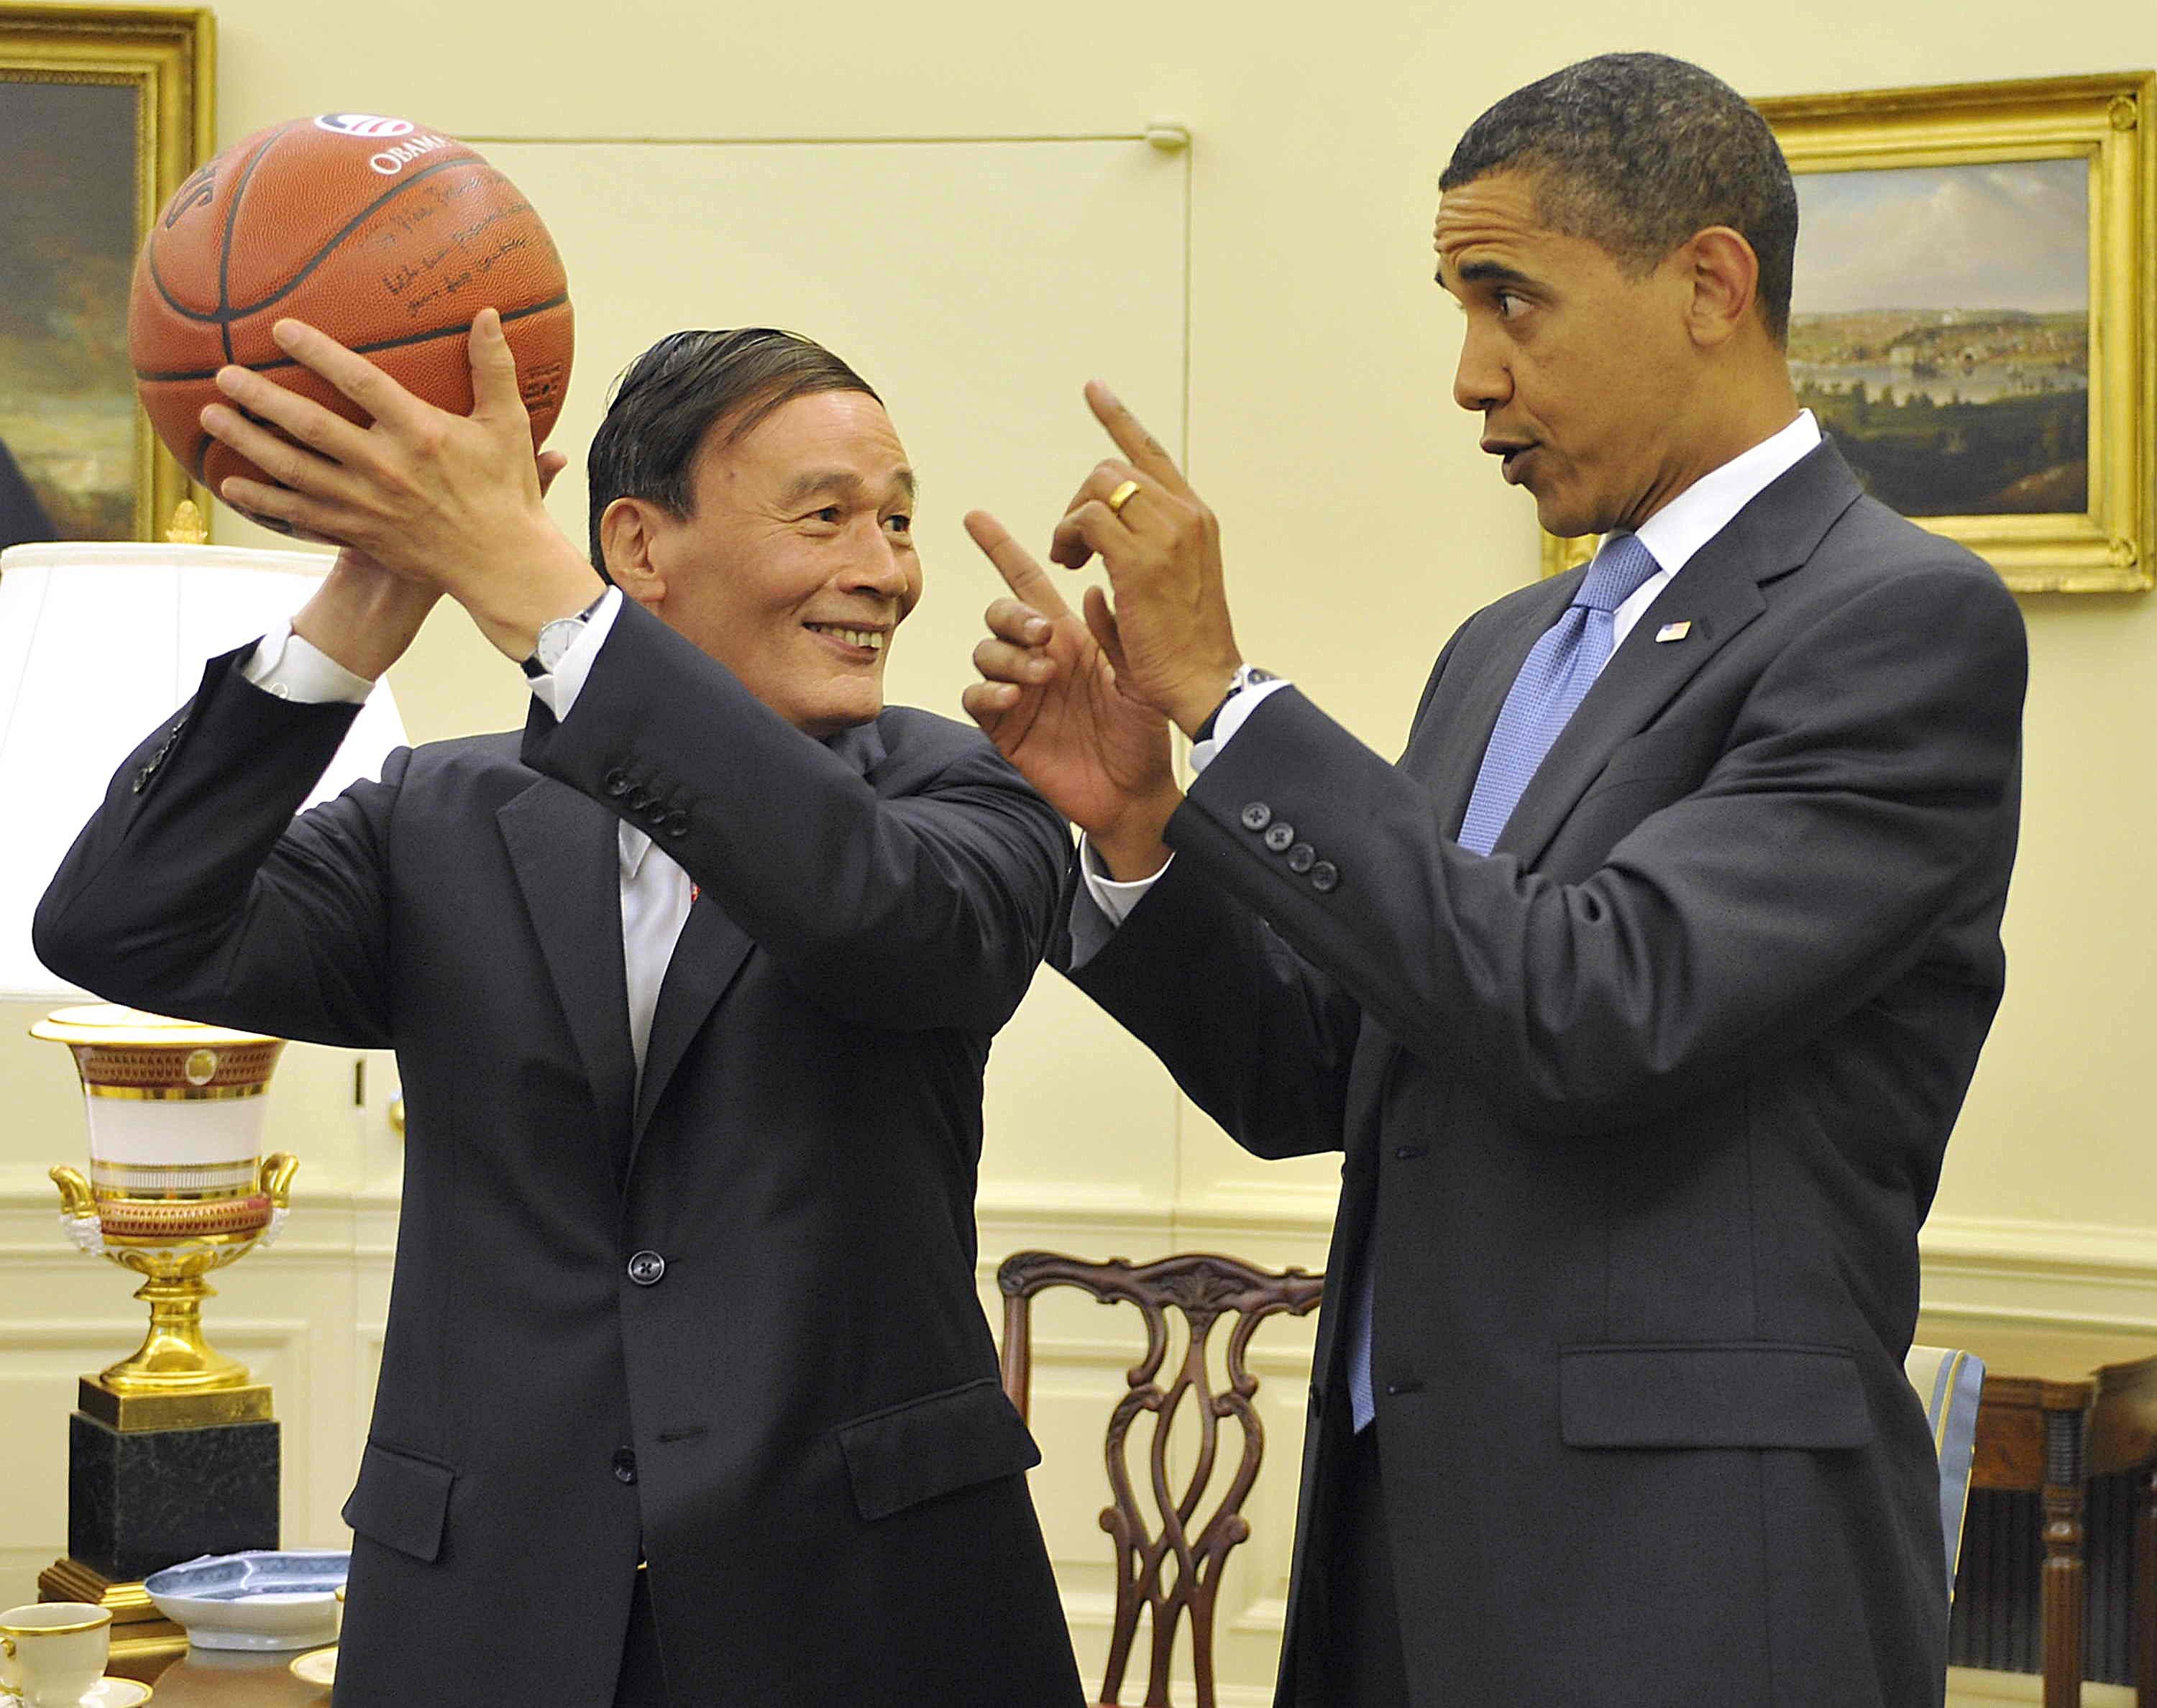 Wang Qishan is given a basketball by then US president Barack Obama in Washington in 2009. As vice-premier at the time, Wang managed economic issues and led trade talks with the EU and US. Photo: Xinhua